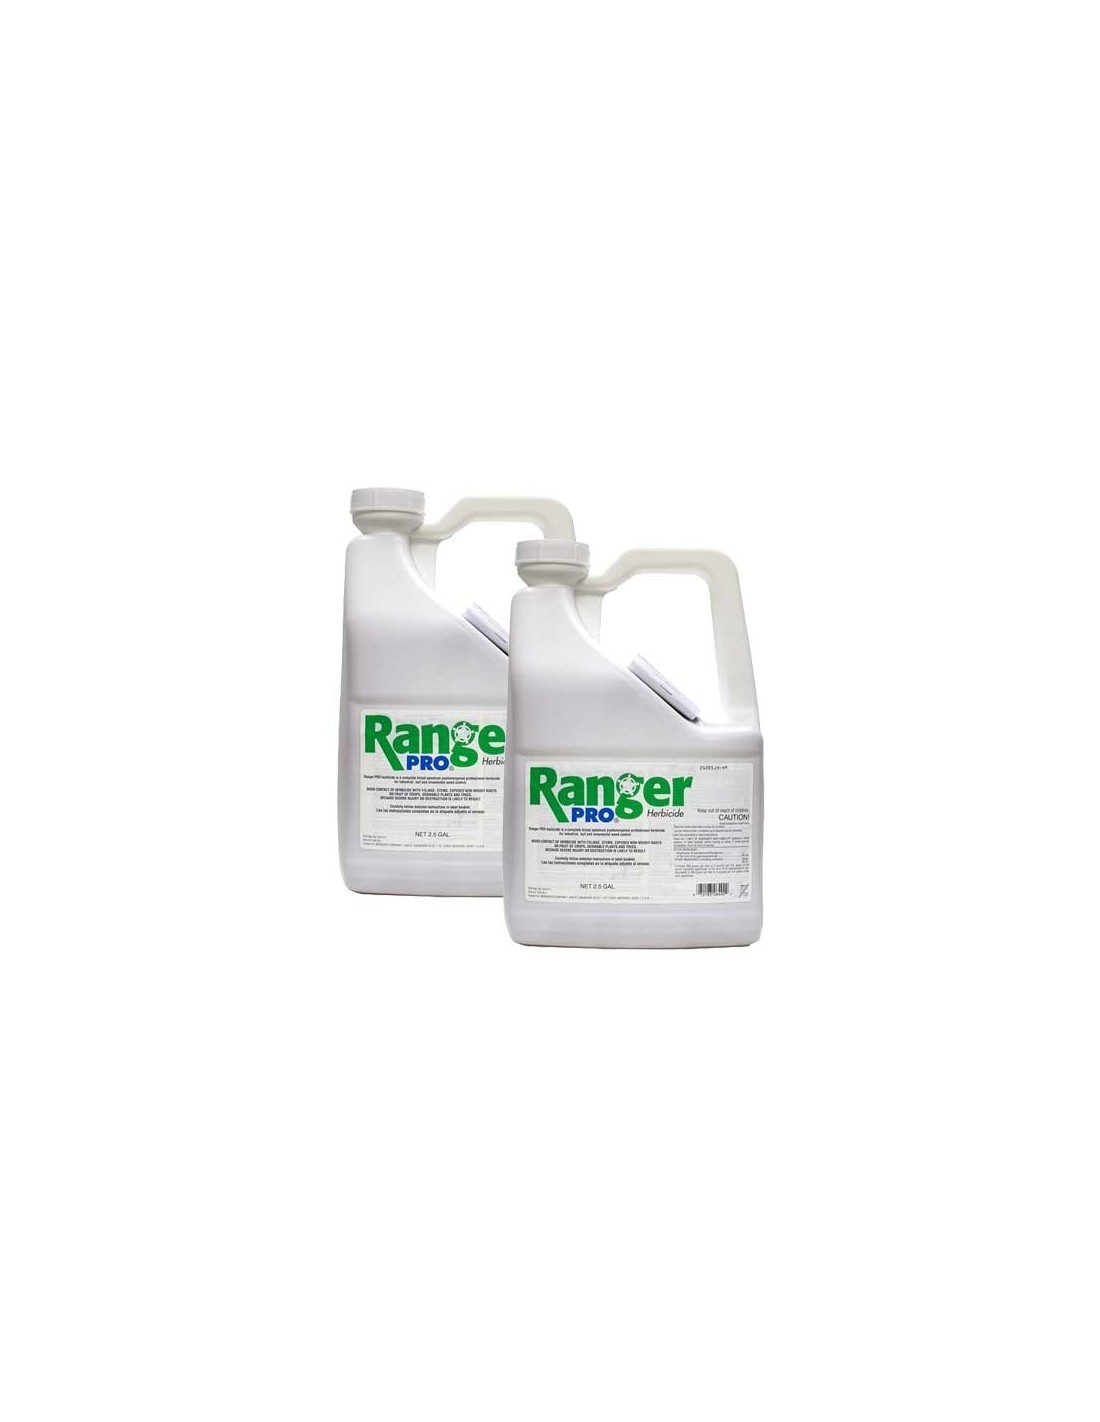 Ranger Pro Herbicide Questions & Answers